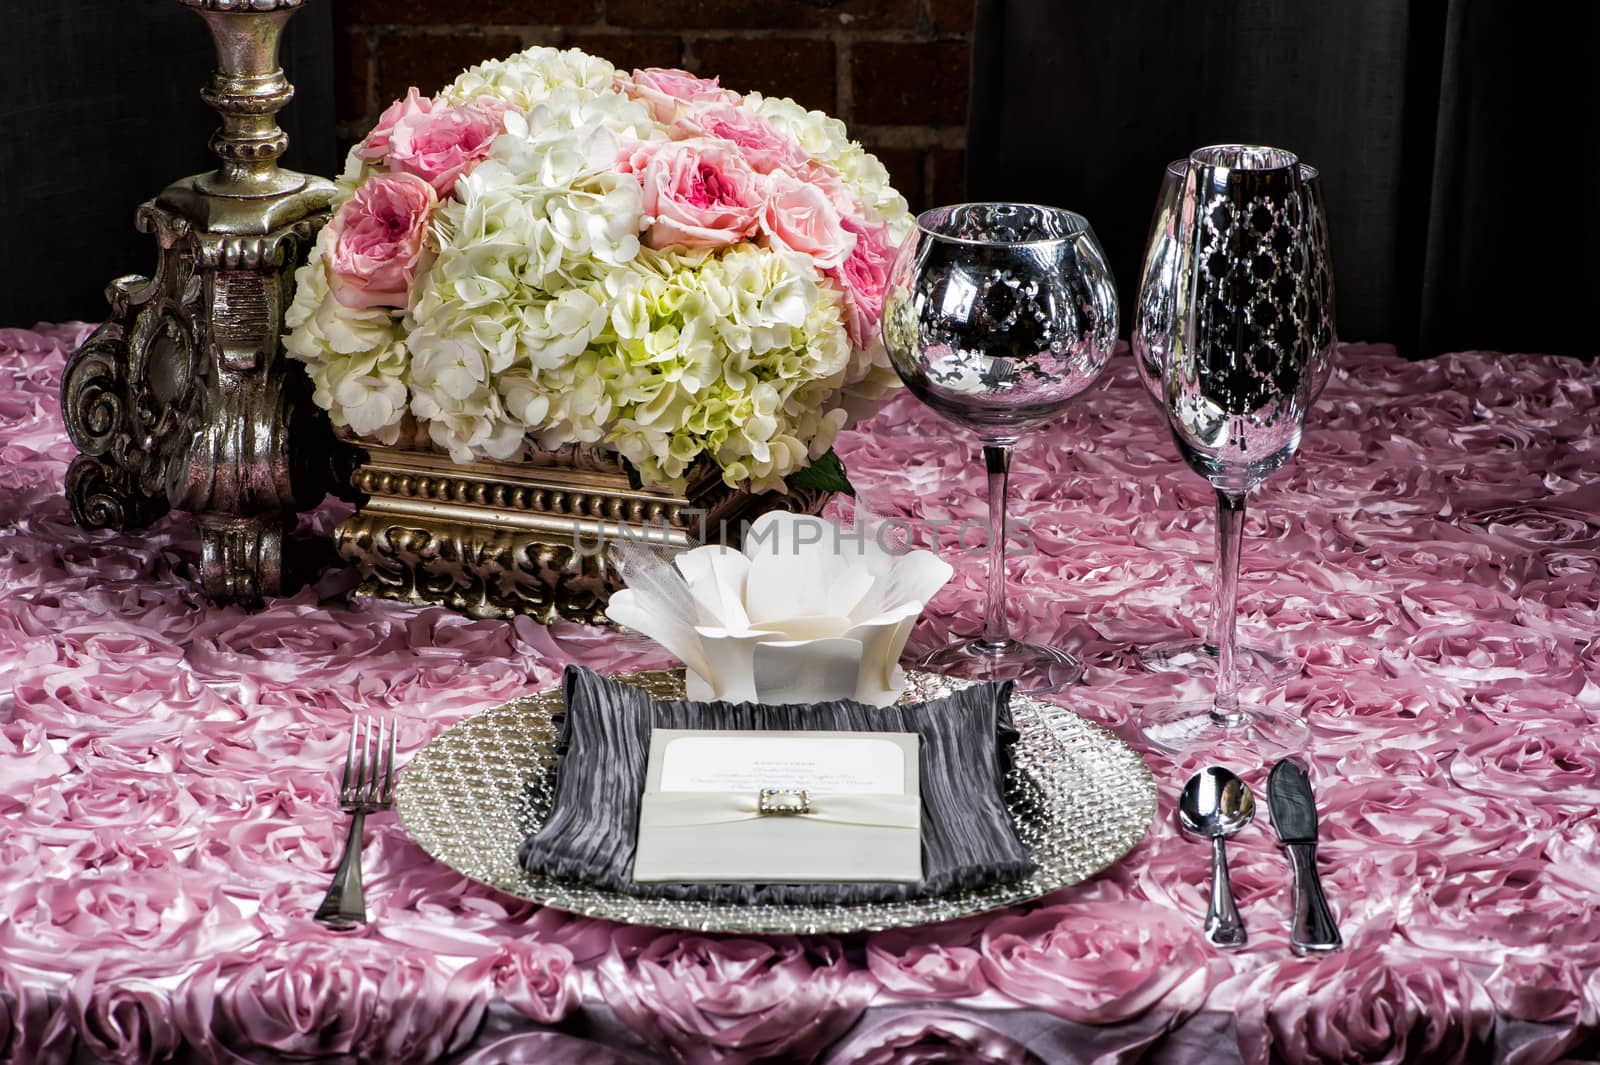 Wedding table setting by gregory21